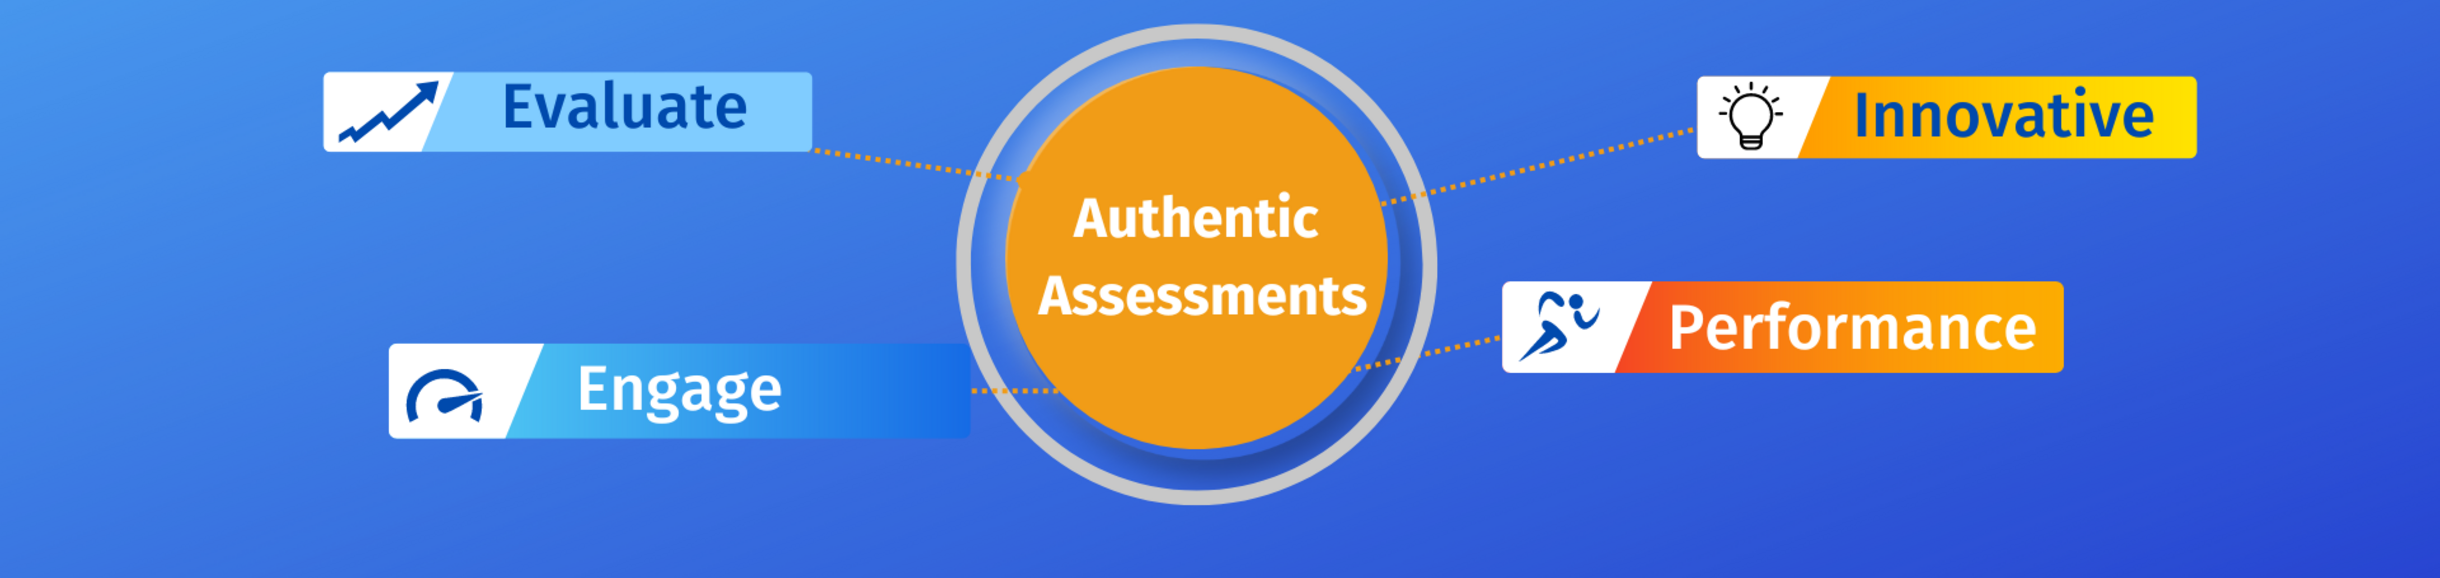 authentic assessments